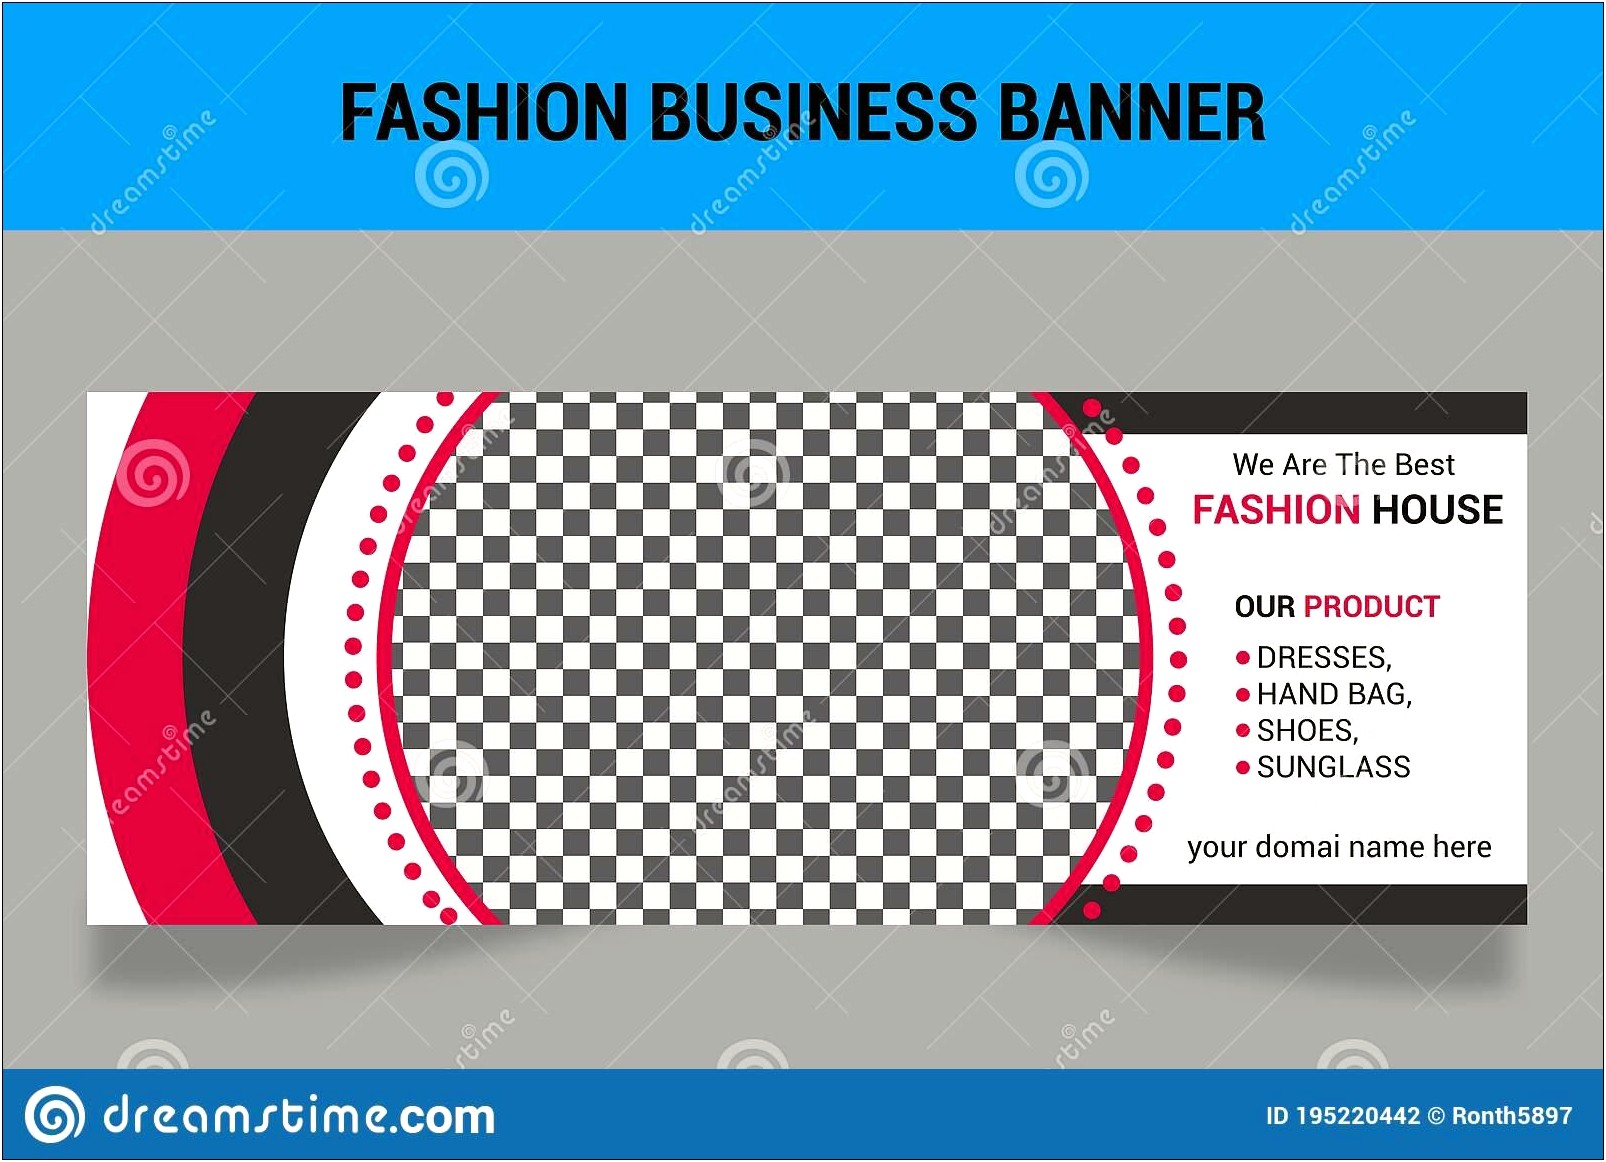 Facebook Cover Design Template Free Download